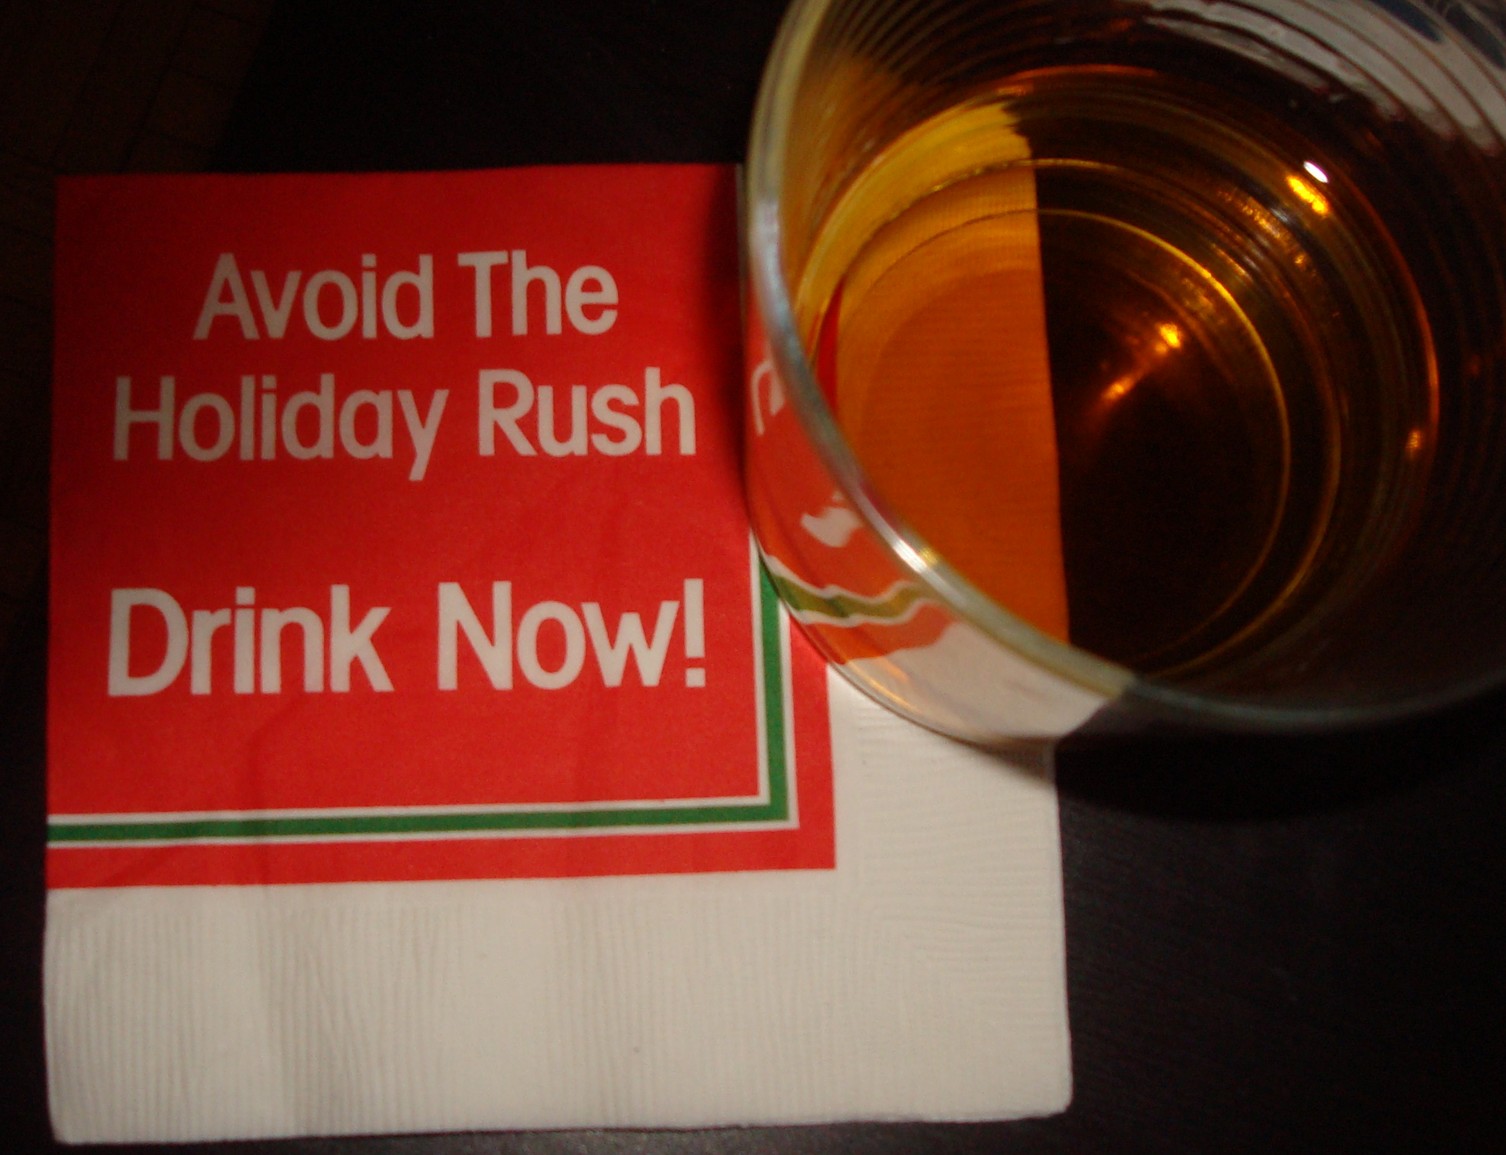 Avoid the Holiday Rush. Drink NOW!